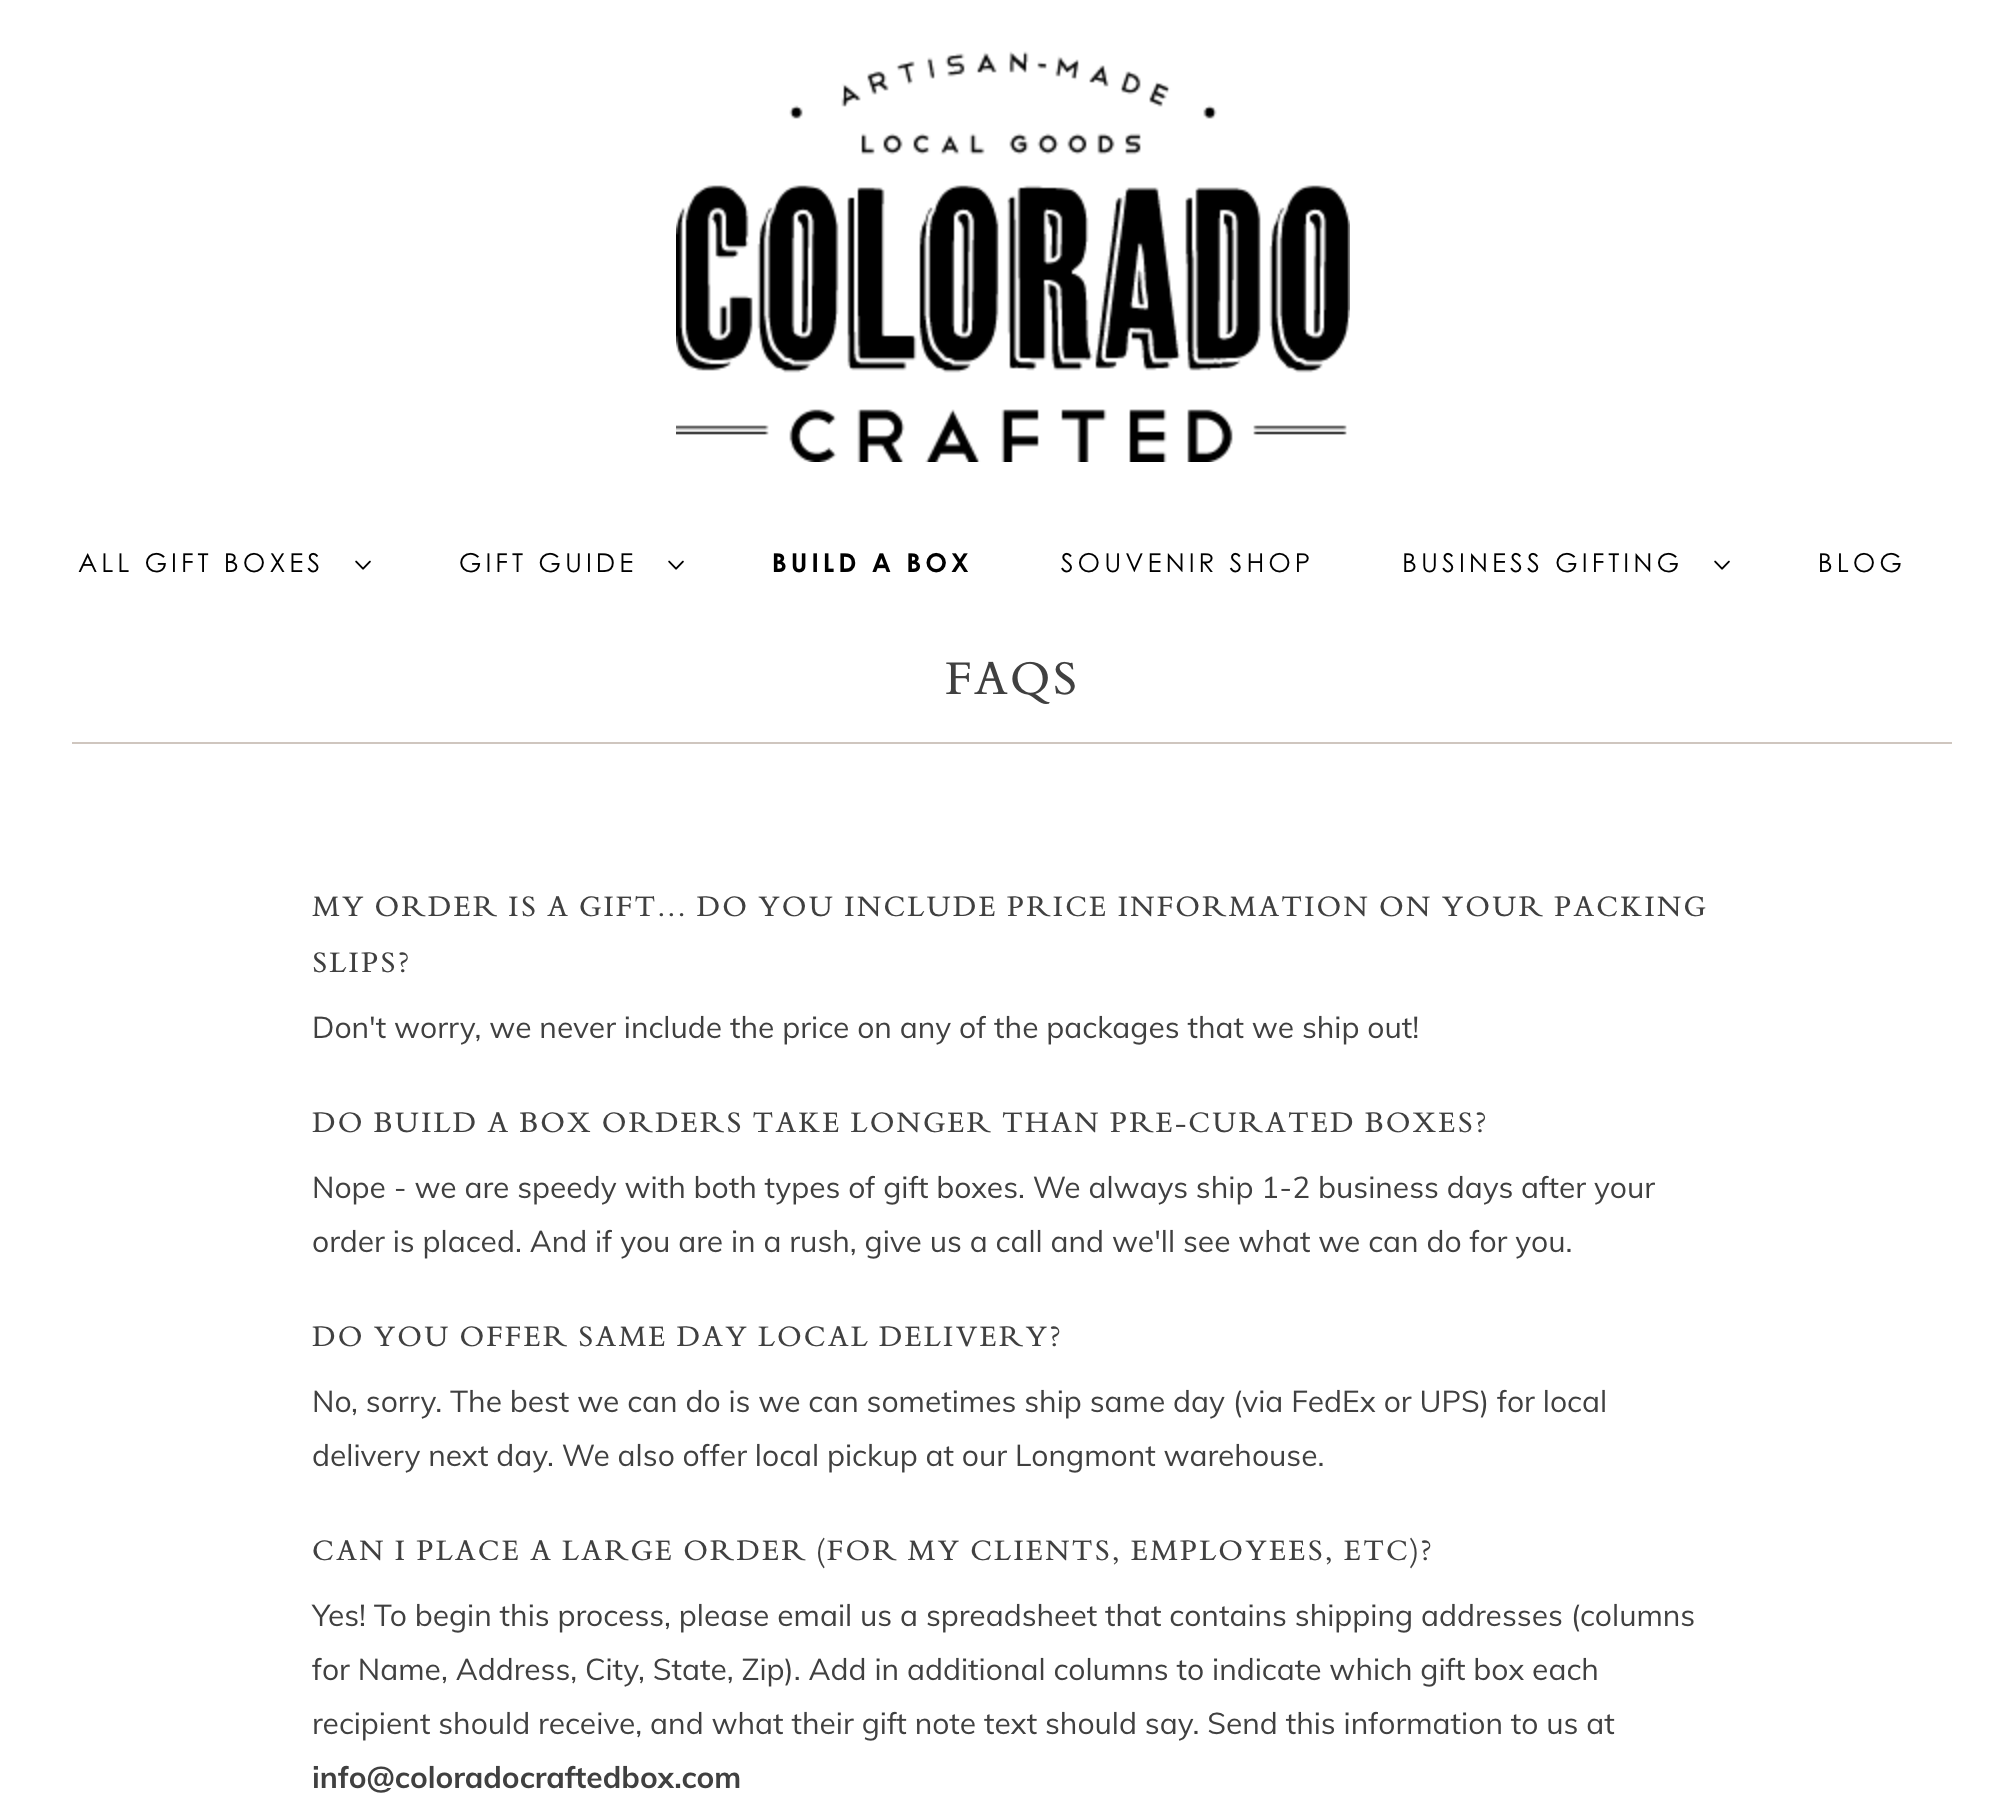 Colorado Crafted’s simply FAQ page with shipping information written in a conversational tone.